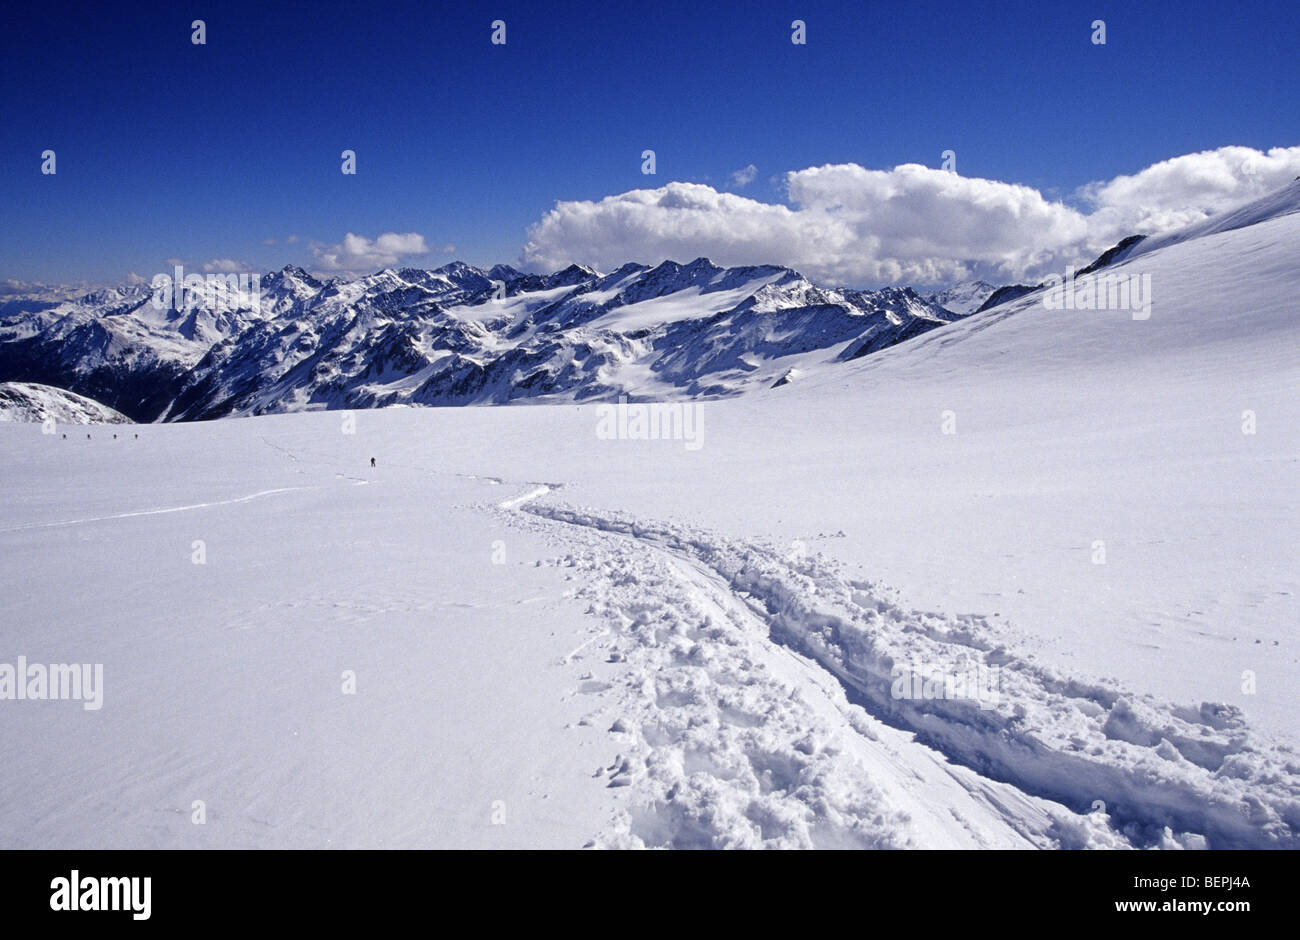 Upper part of the Martelltal glacier, Ortler, Italy. Stock Photo